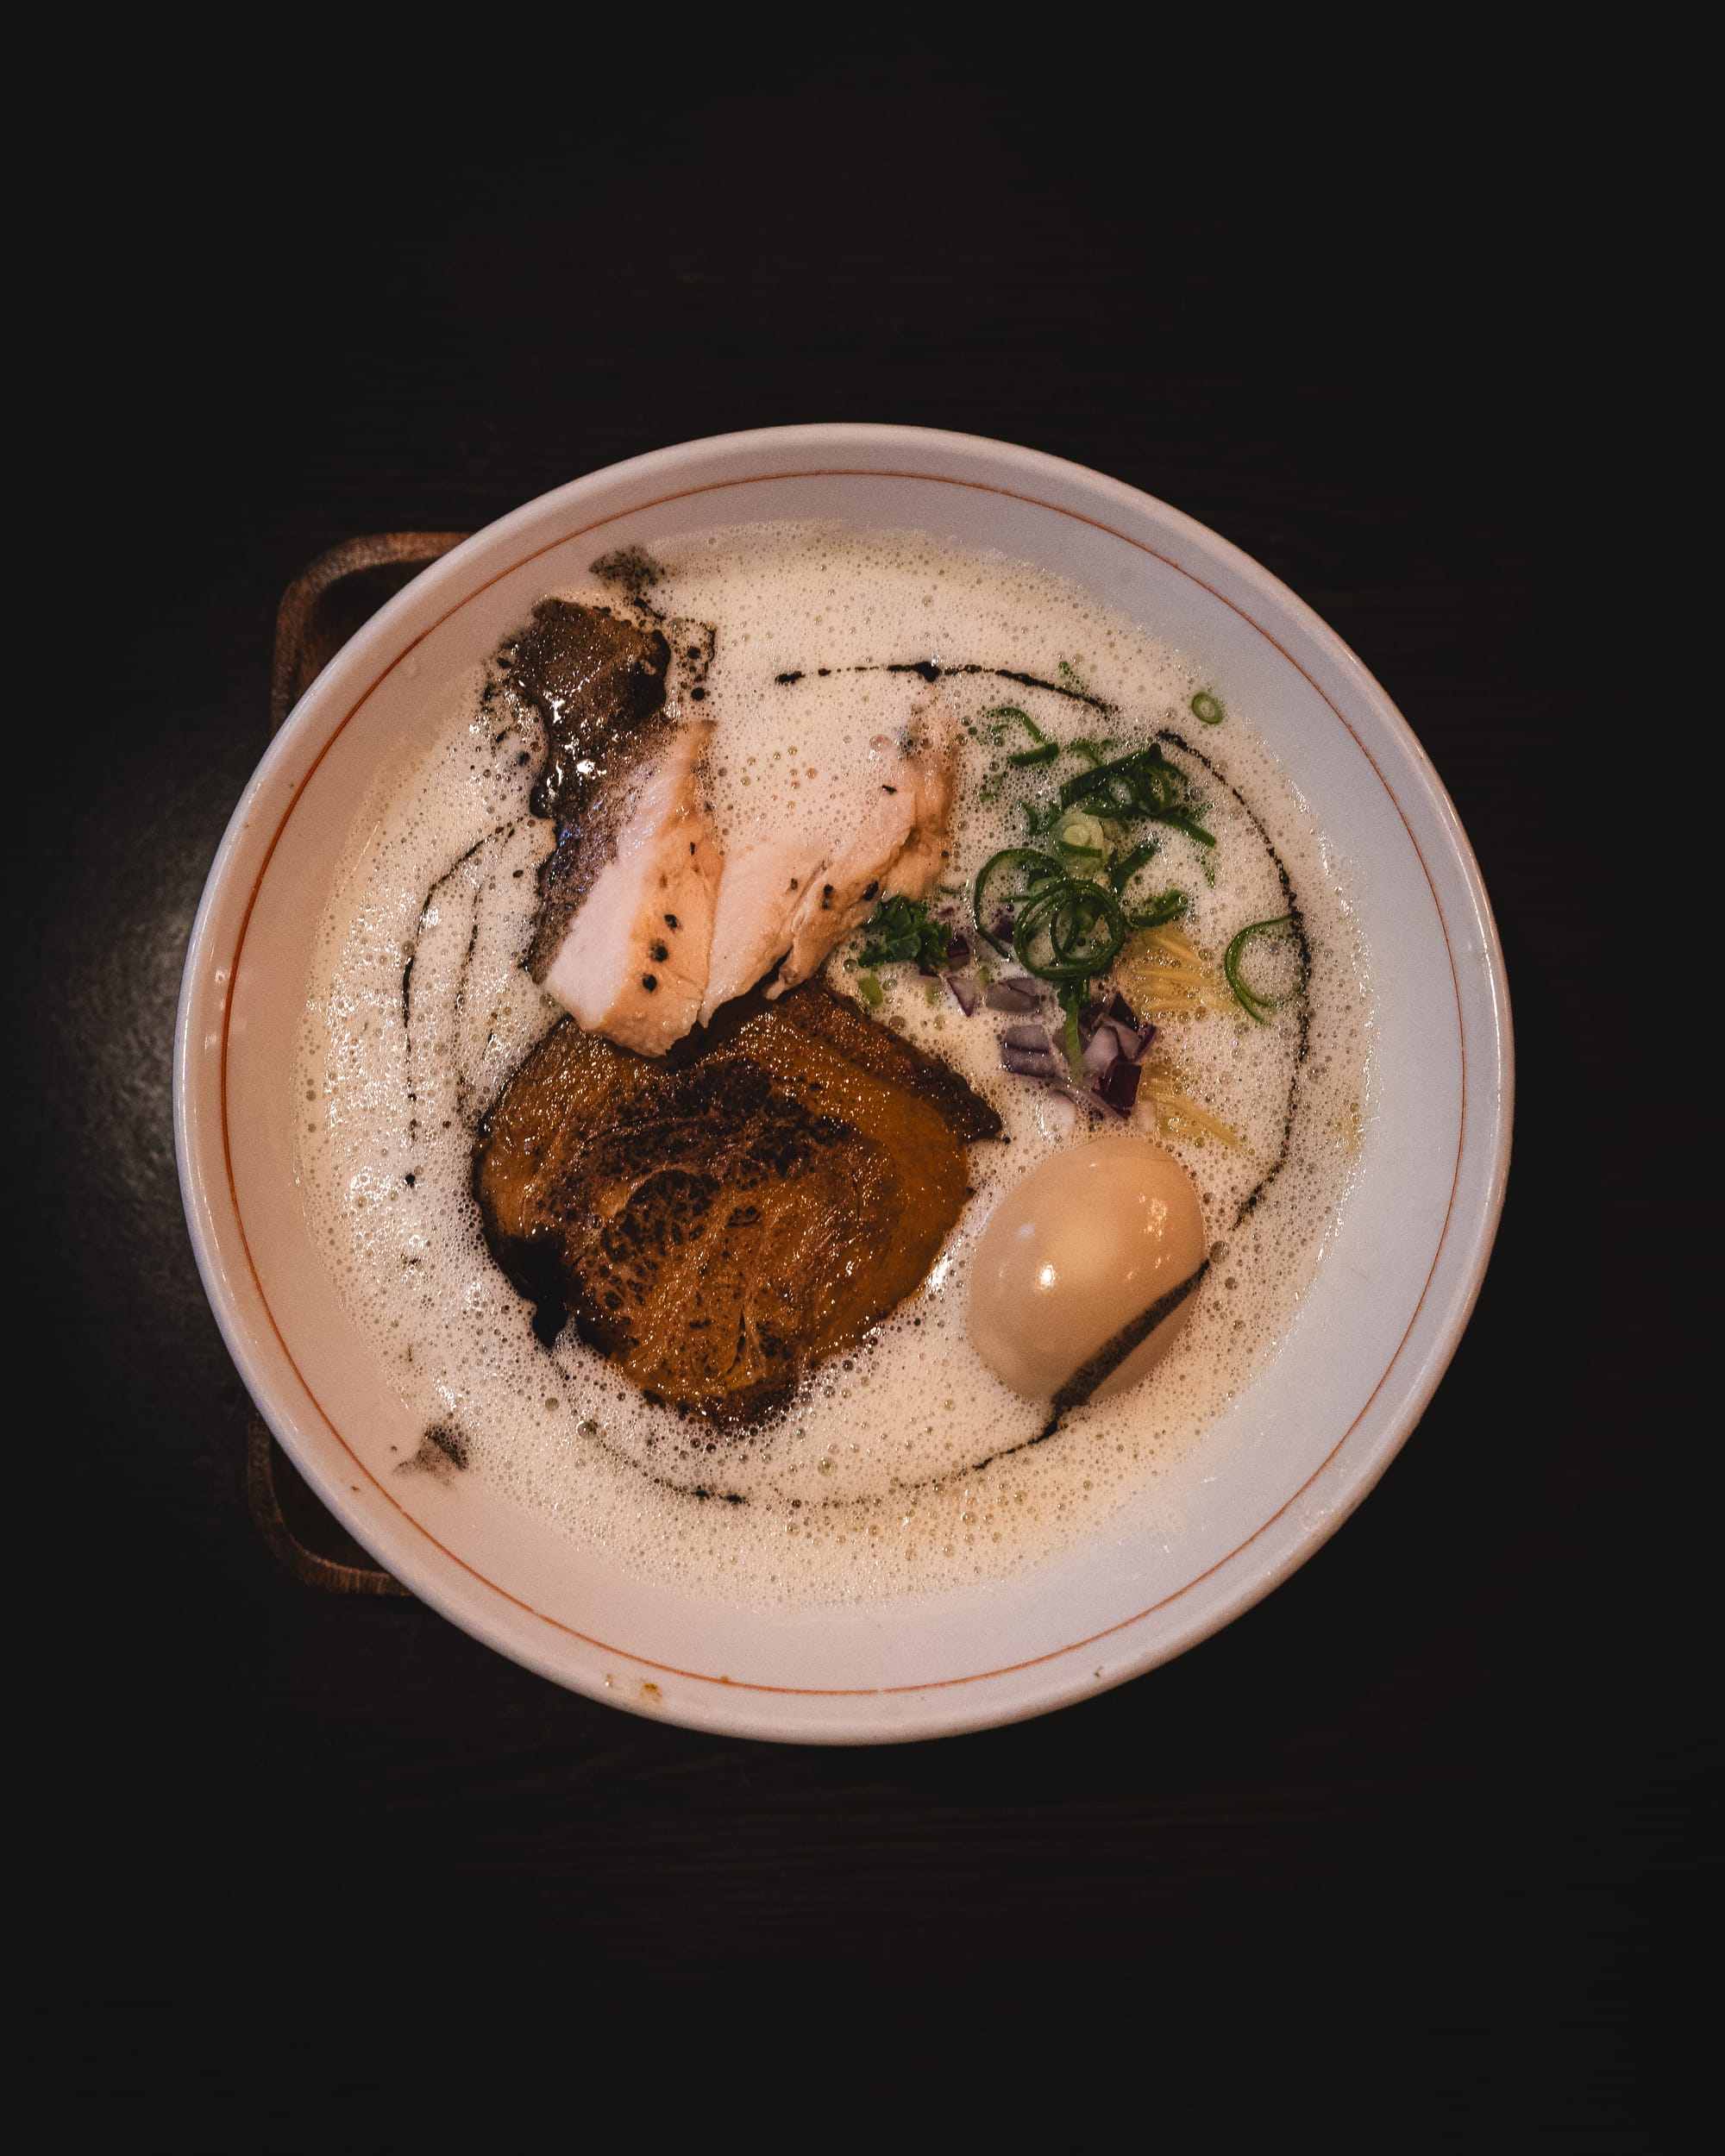 Top down shot of ramen with chicken chashu, chashu, spring onion and egg showing